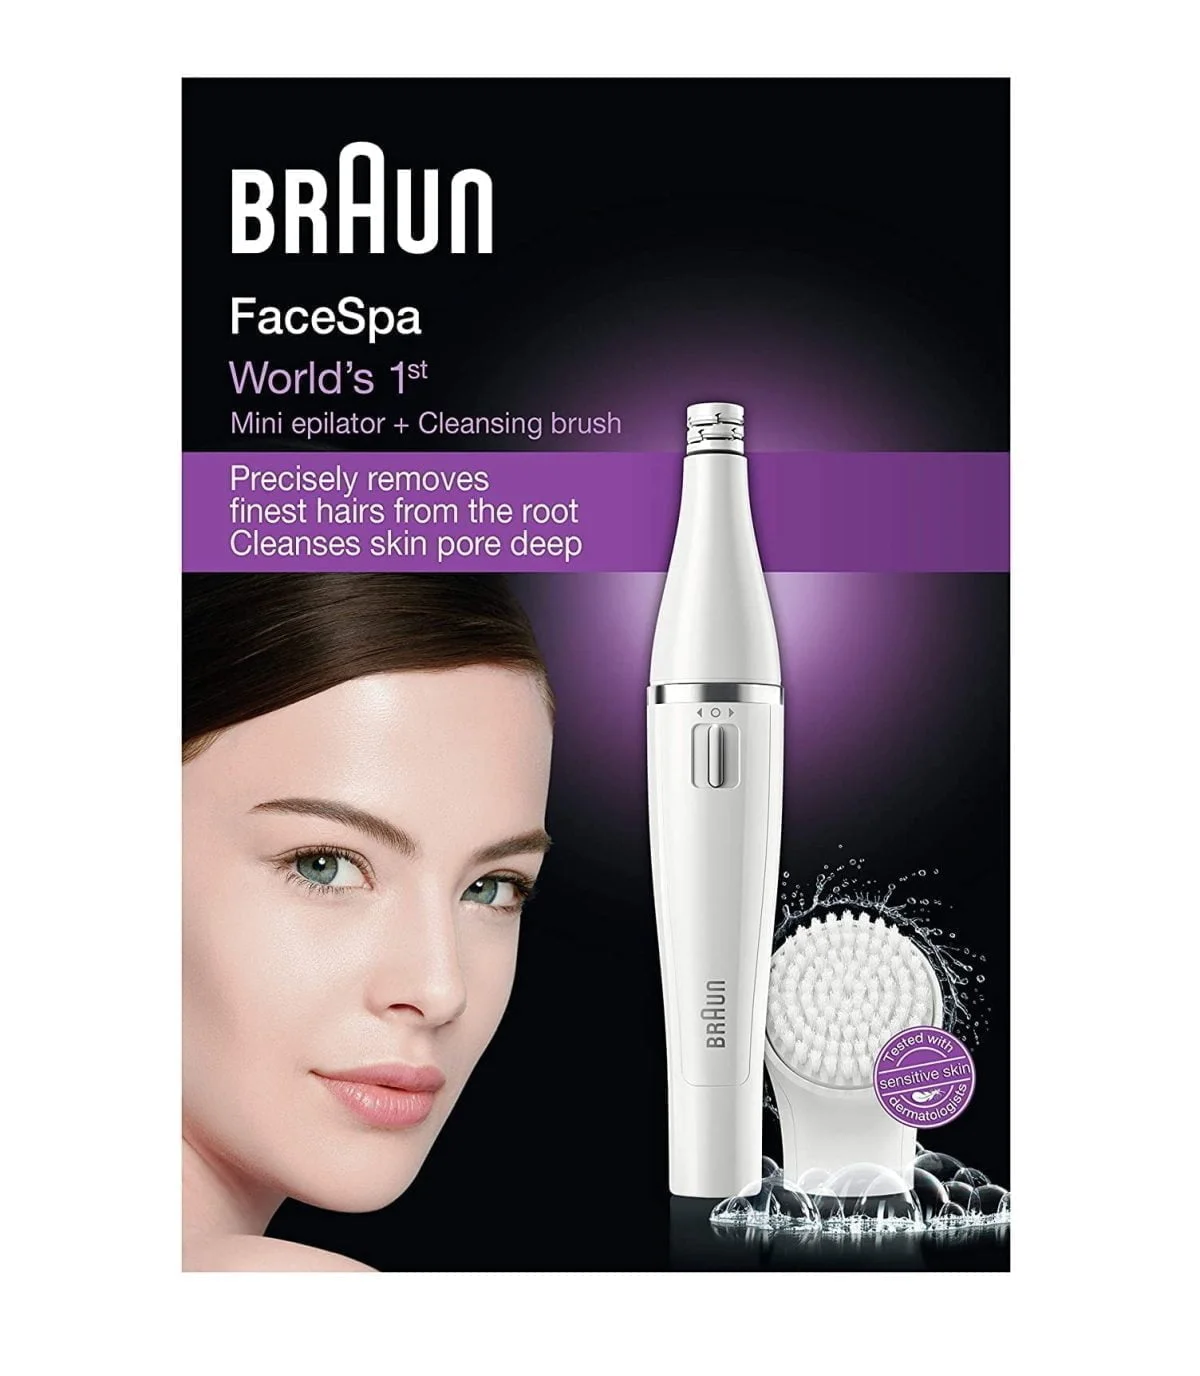 81B23Brinml. Ac Sl1500 Braun &Lt;H1&Gt;Braun Face 810 Facial Epilator &Amp; Facial Cleansing Brush With Micro-Oscillations&Lt;/H1&Gt; &Lt;Ul Class=&Quot;A-Unordered-List A-Vertical A-Spacing-Mini&Quot;&Gt; &Lt;Li&Gt;&Lt;Span Class=&Quot;A-List-Item&Quot;&Gt; World’s First Facial Epilator And Cleansing Brush System &Lt;/Span&Gt;&Lt;/Li&Gt; &Lt;Li&Gt;&Lt;Span Class=&Quot;A-List-Item&Quot;&Gt; Facial Epilator: Sleek And Compact Design For Precise Epilation. 10 Micro-Openings Catch Even The Finest Hairs (0.02Mm) &Lt;/Span&Gt;&Lt;/Li&Gt; &Lt;Li&Gt;&Lt;Span Class=&Quot;A-List-Item&Quot;&Gt; Facial Cleansing Brush: Gently Cleanse Skin Pore-Deep With Micro-Oscillations. Tested With Dermatologists For Daily Use On Sensitive Skin &Lt;/Span&Gt;&Lt;/Li&Gt; &Lt;Li&Gt;&Lt;Span Class=&Quot;A-List-Item&Quot;&Gt; Gentle Epilation For Smooth Skin Up To 4 Weeks &Lt;/Span&Gt;&Lt;/Li&Gt; &Lt;Li&Gt;&Lt;Span Class=&Quot;A-List-Item&Quot;&Gt; Ergonomic Design, Comfortable Grip &Lt;/Span&Gt;&Lt;/Li&Gt; &Lt;/Ul&Gt; Braun Face 810 Facial Epilator Braun Face 810 Facial Epilator And Facial Cleansing Brush With Micro-Oscillations